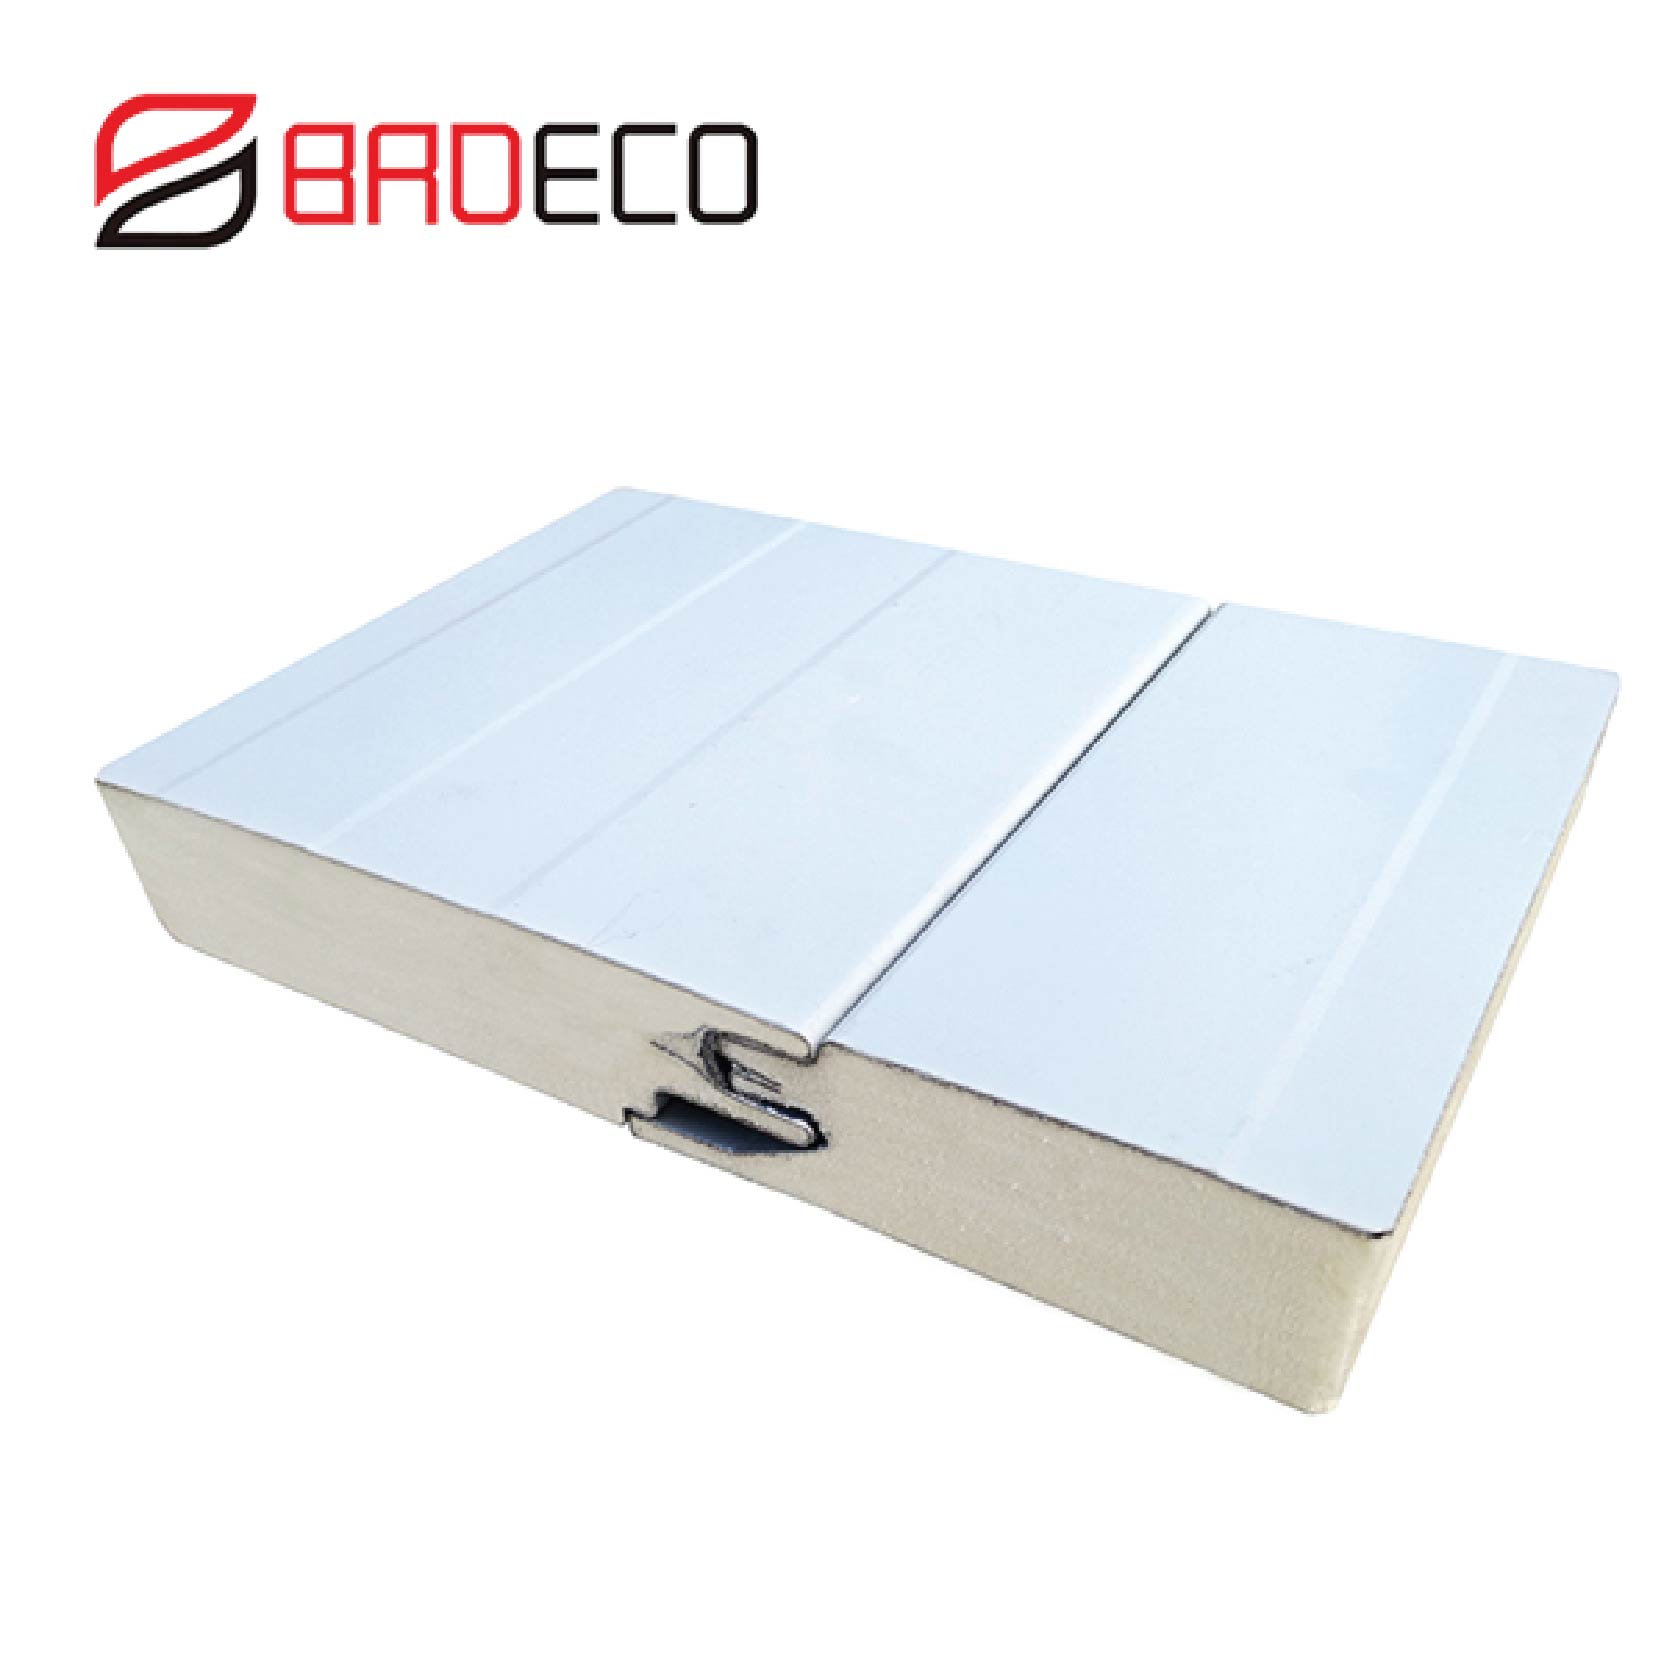 Sandwich Panel - The Responsibility Of Green Building Materials